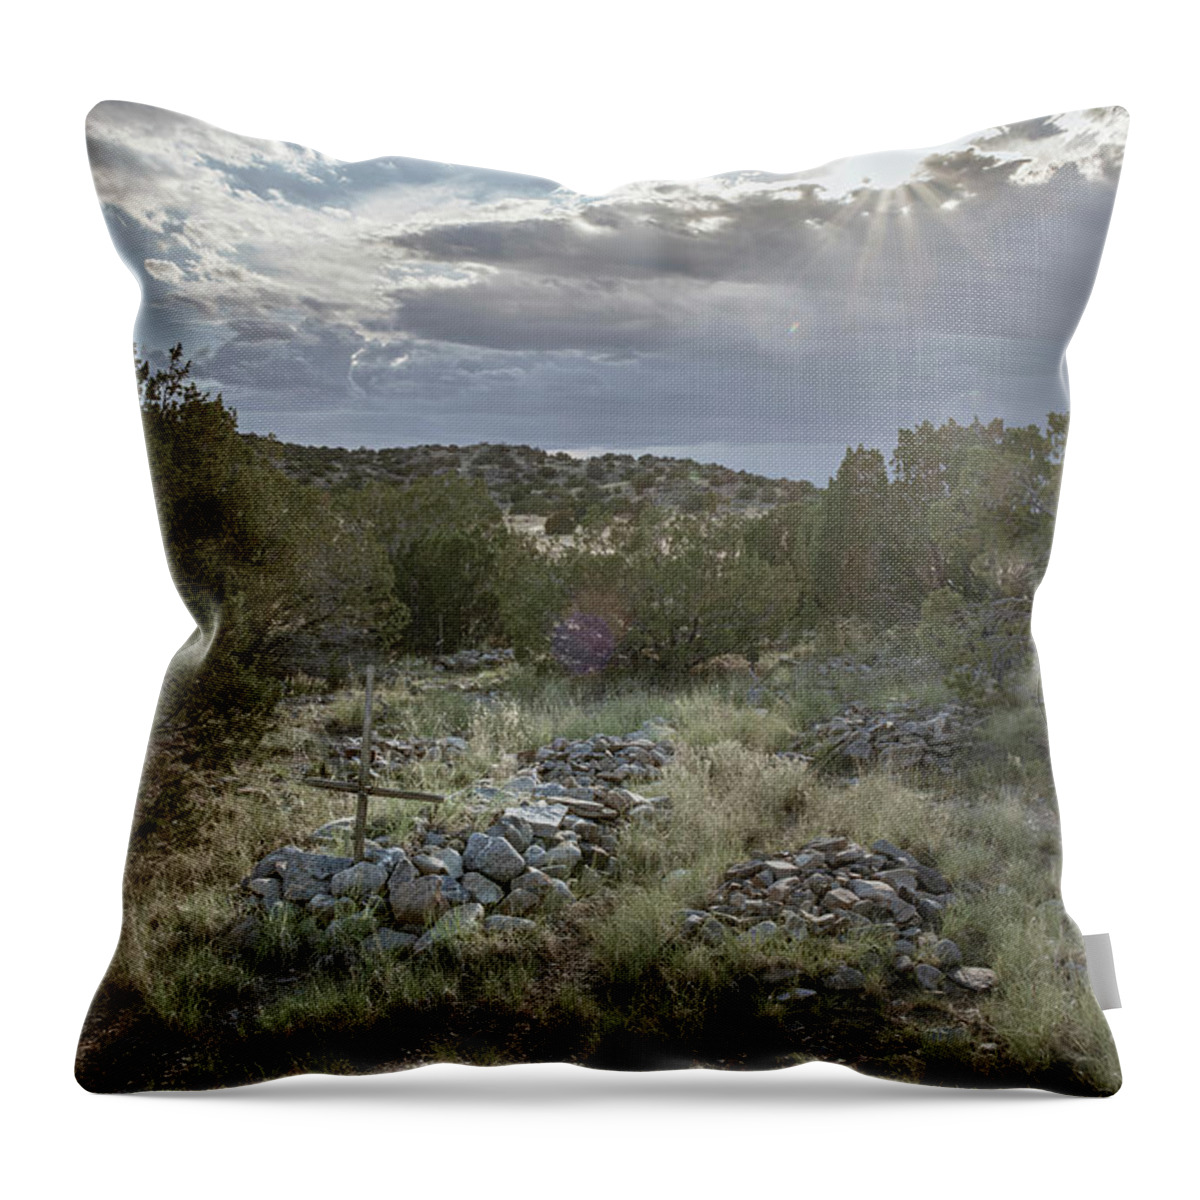 Landscapes Throw Pillow featuring the photograph Shine On by Mary Lee Dereske